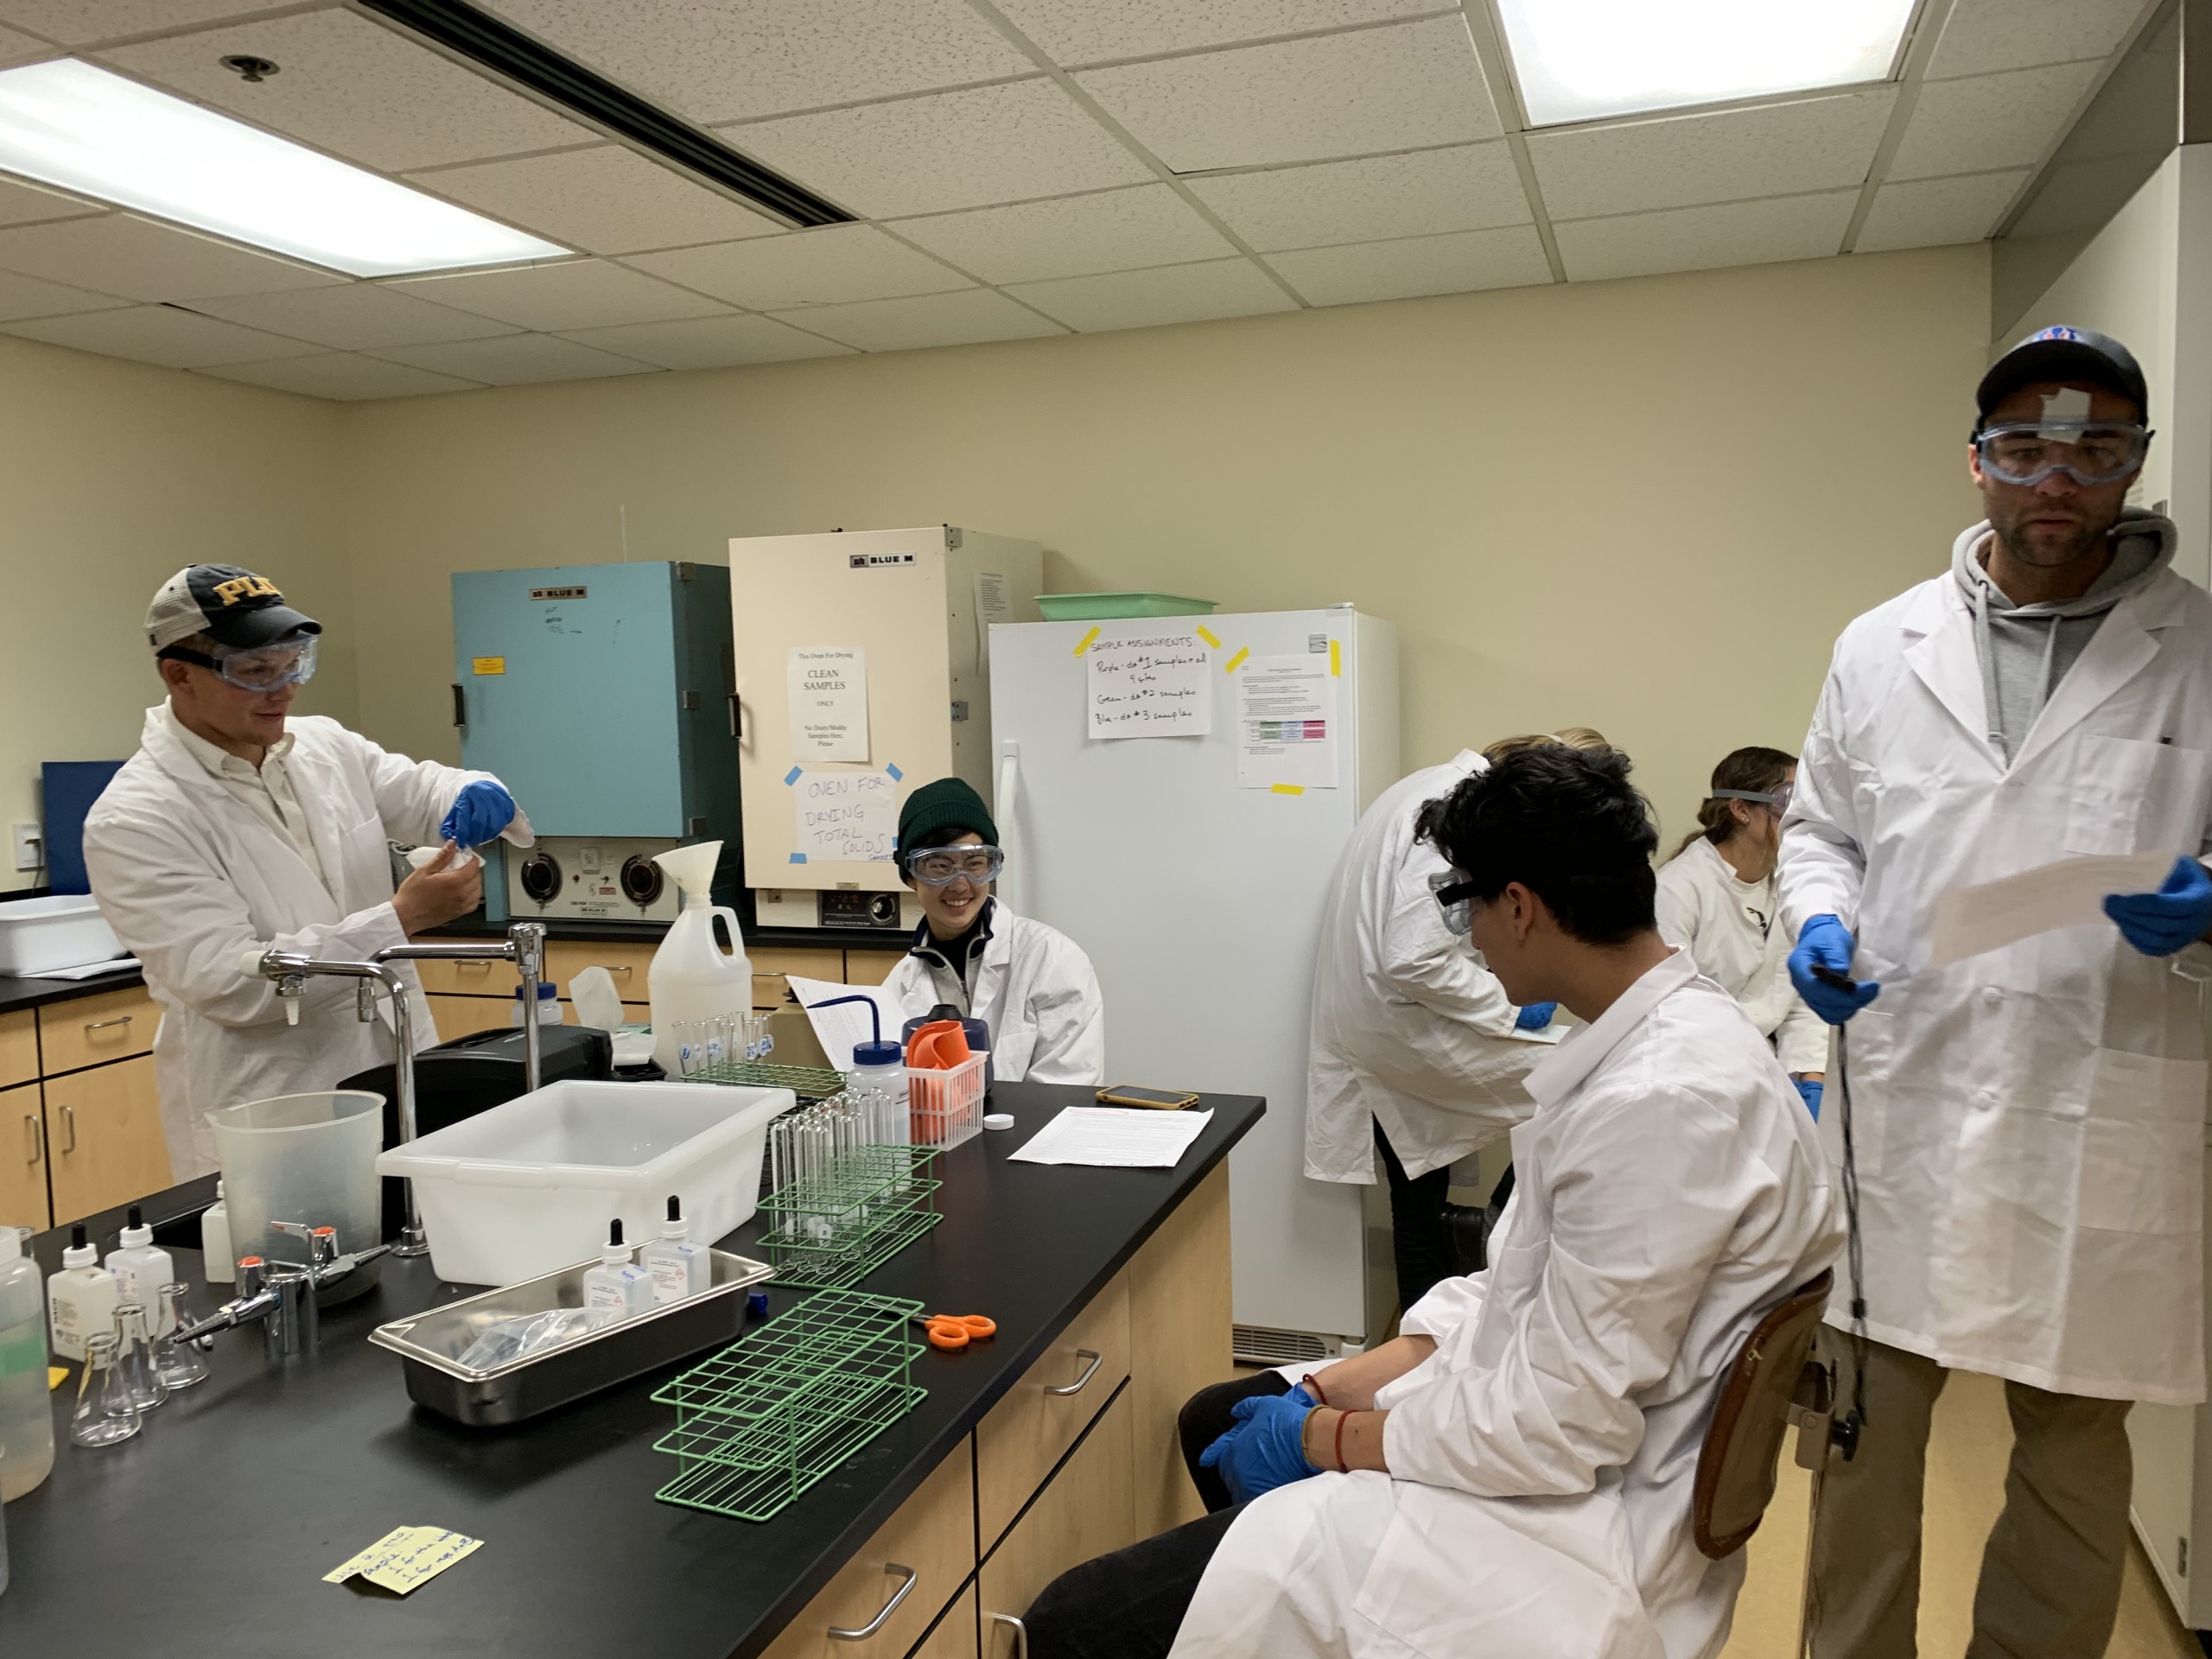 Environmental studies conducting research in a lab.